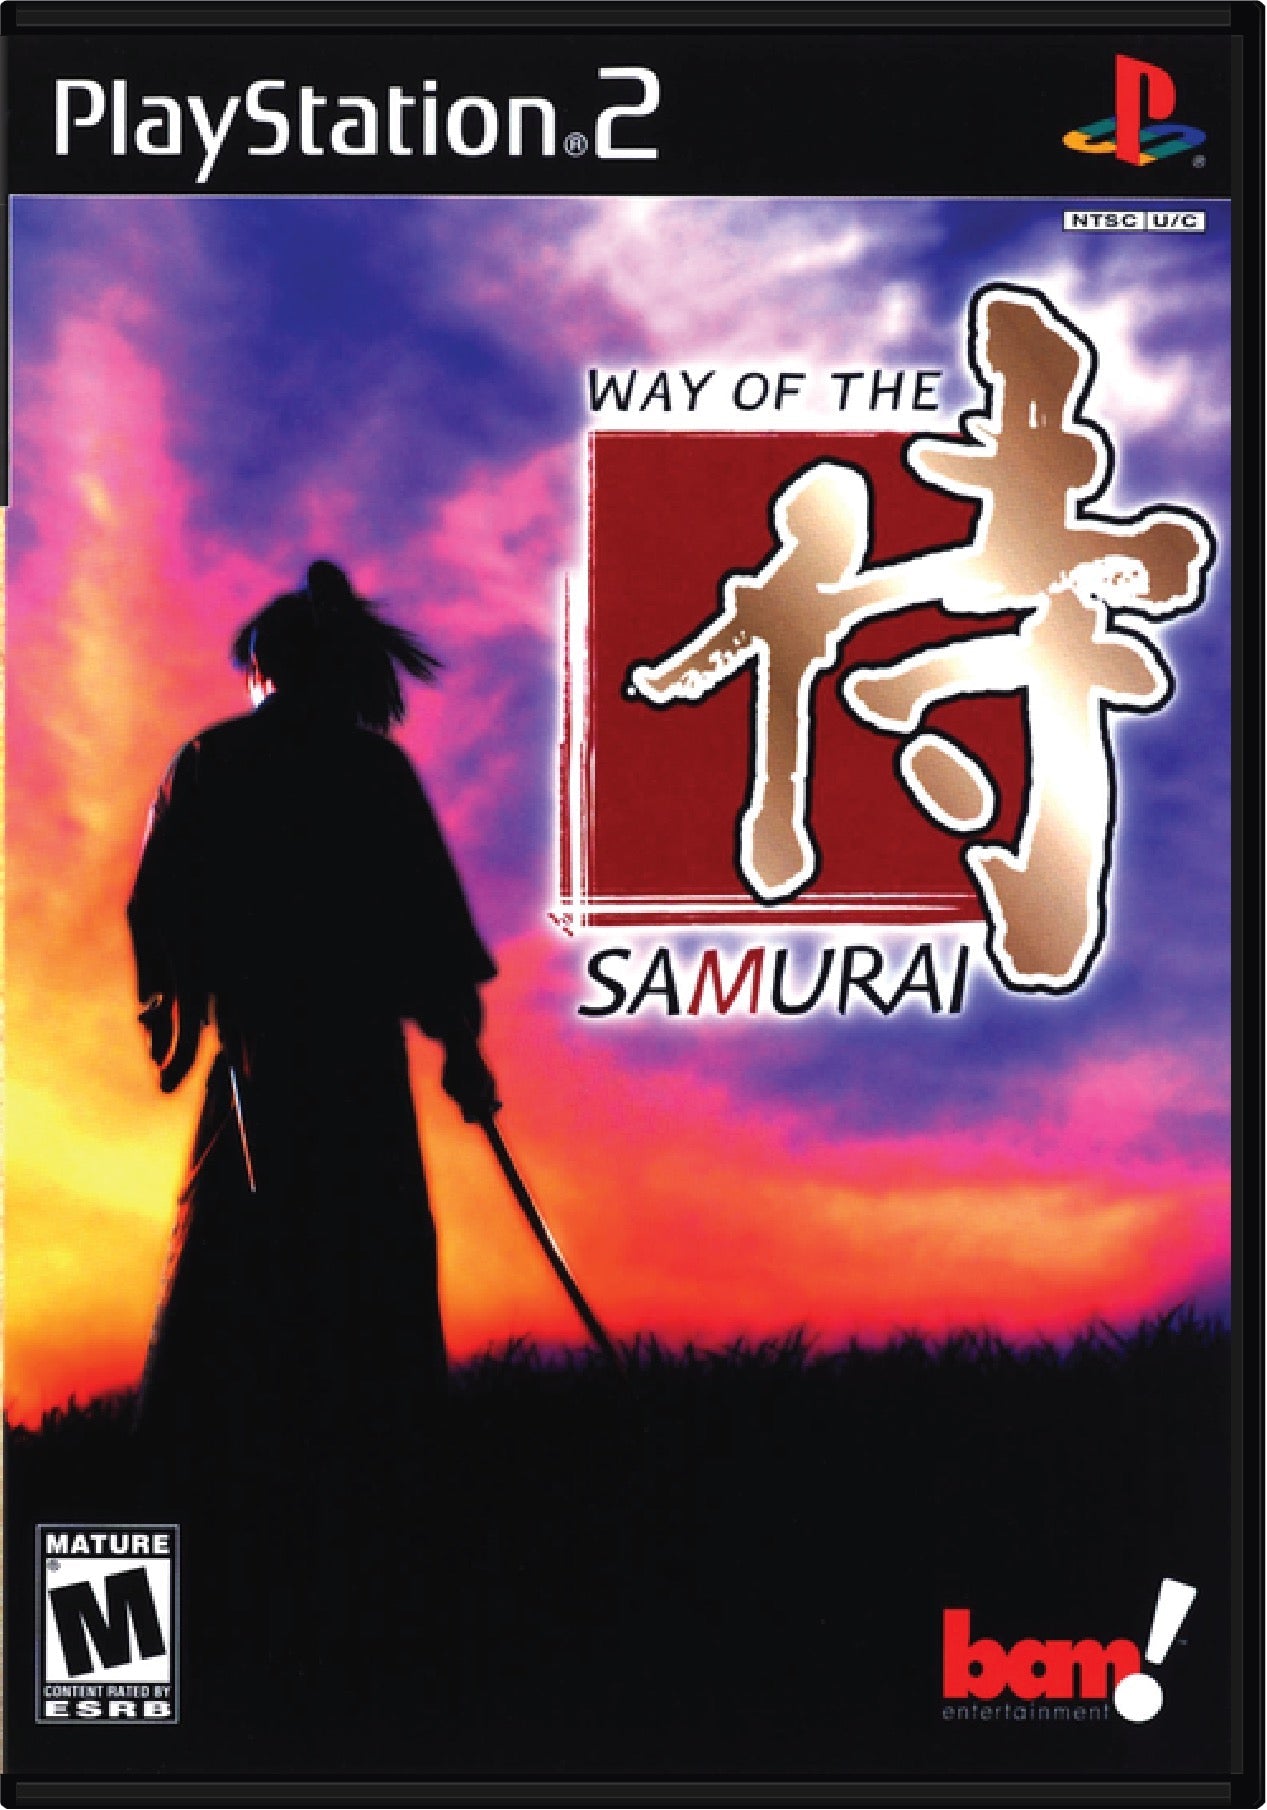 Way of the Samurai Cover Art and Product Photo